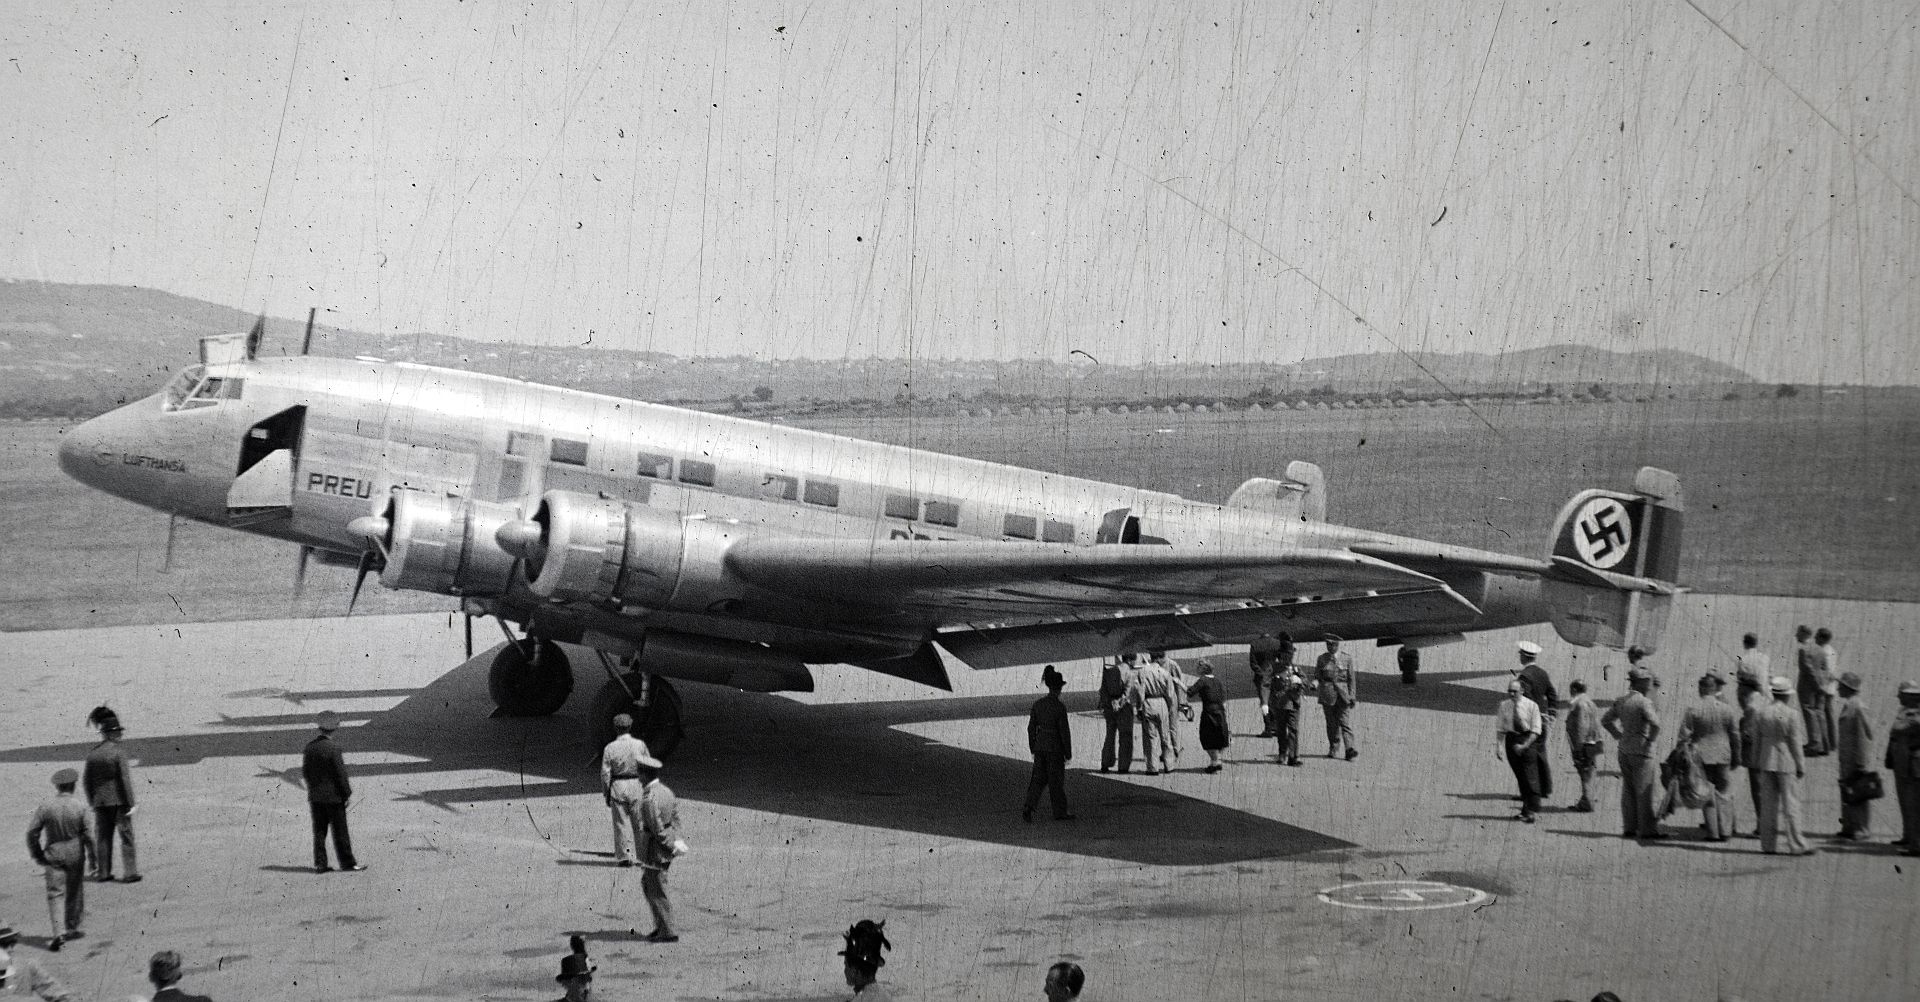 AIVI Buda Rs Airport July 1938